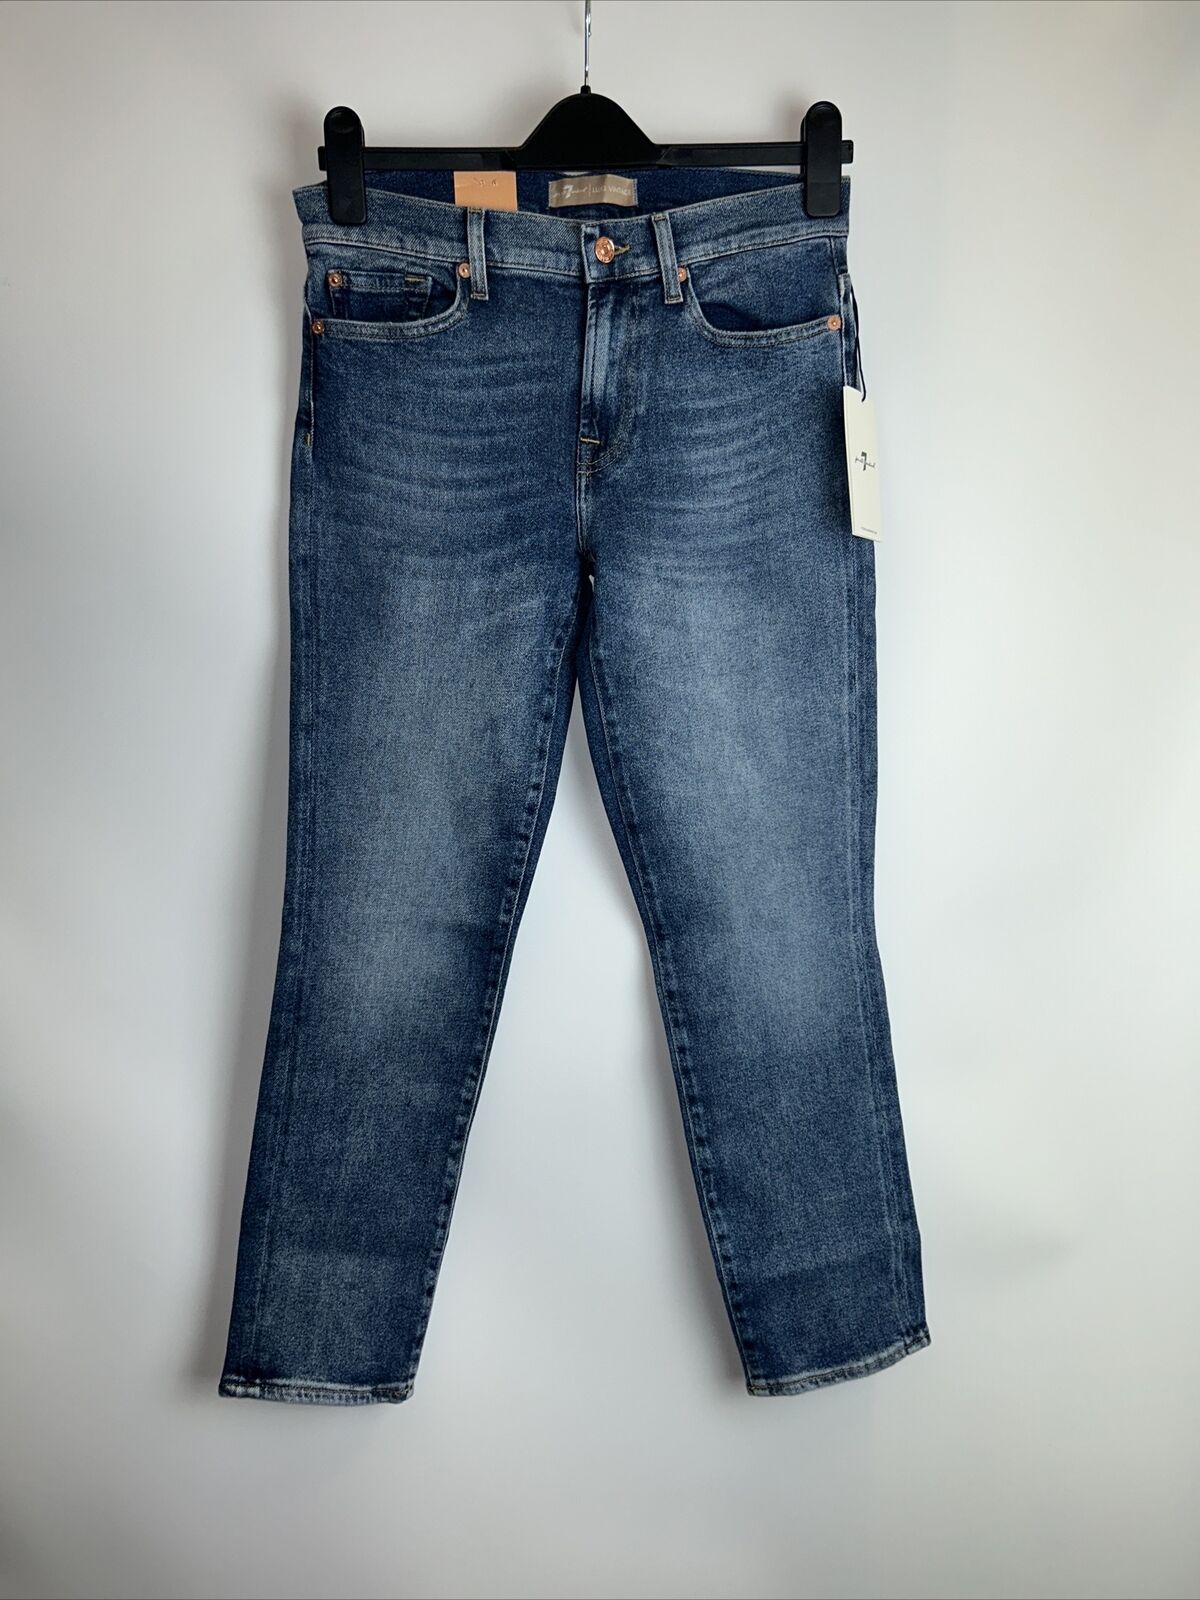 7 for all Mankind. Luxe Vintage Love Mind - Mid Blue. UK 28.